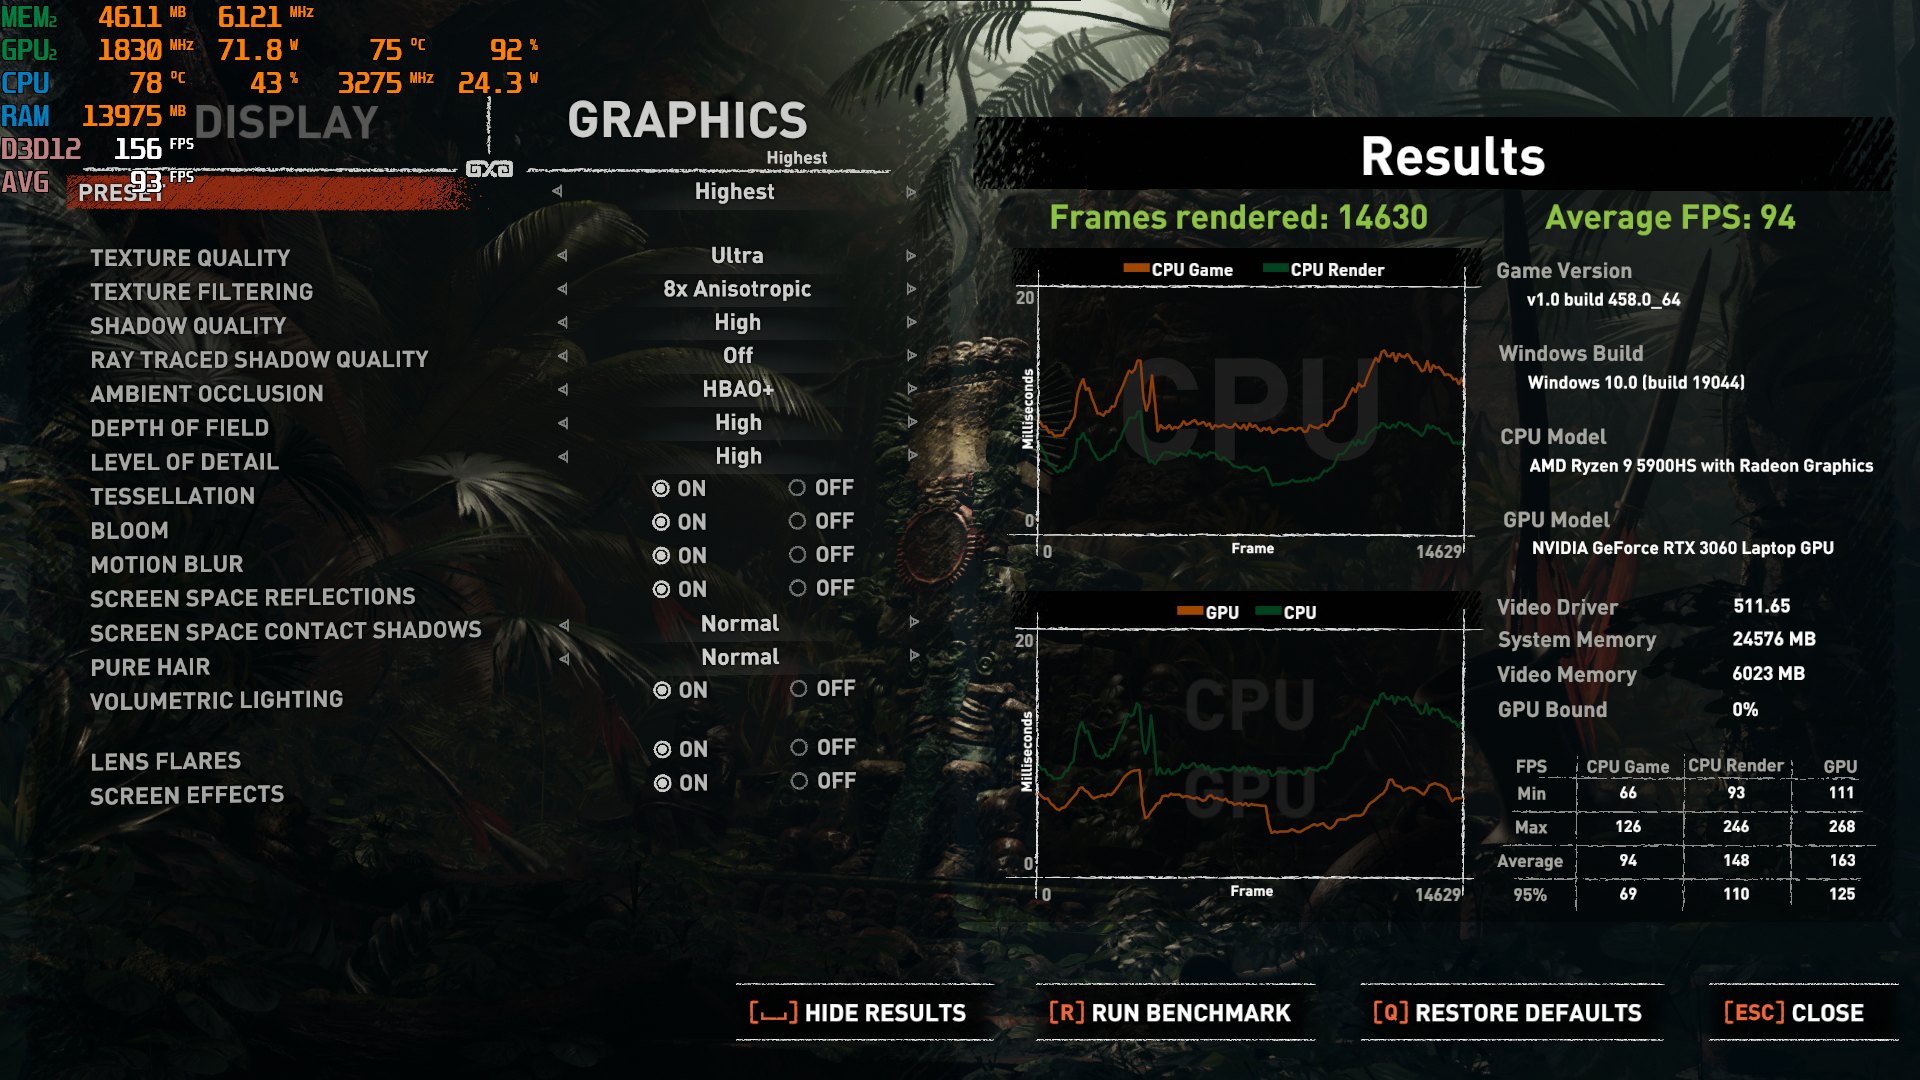 igpu on - highest - dlss ultra performance.png